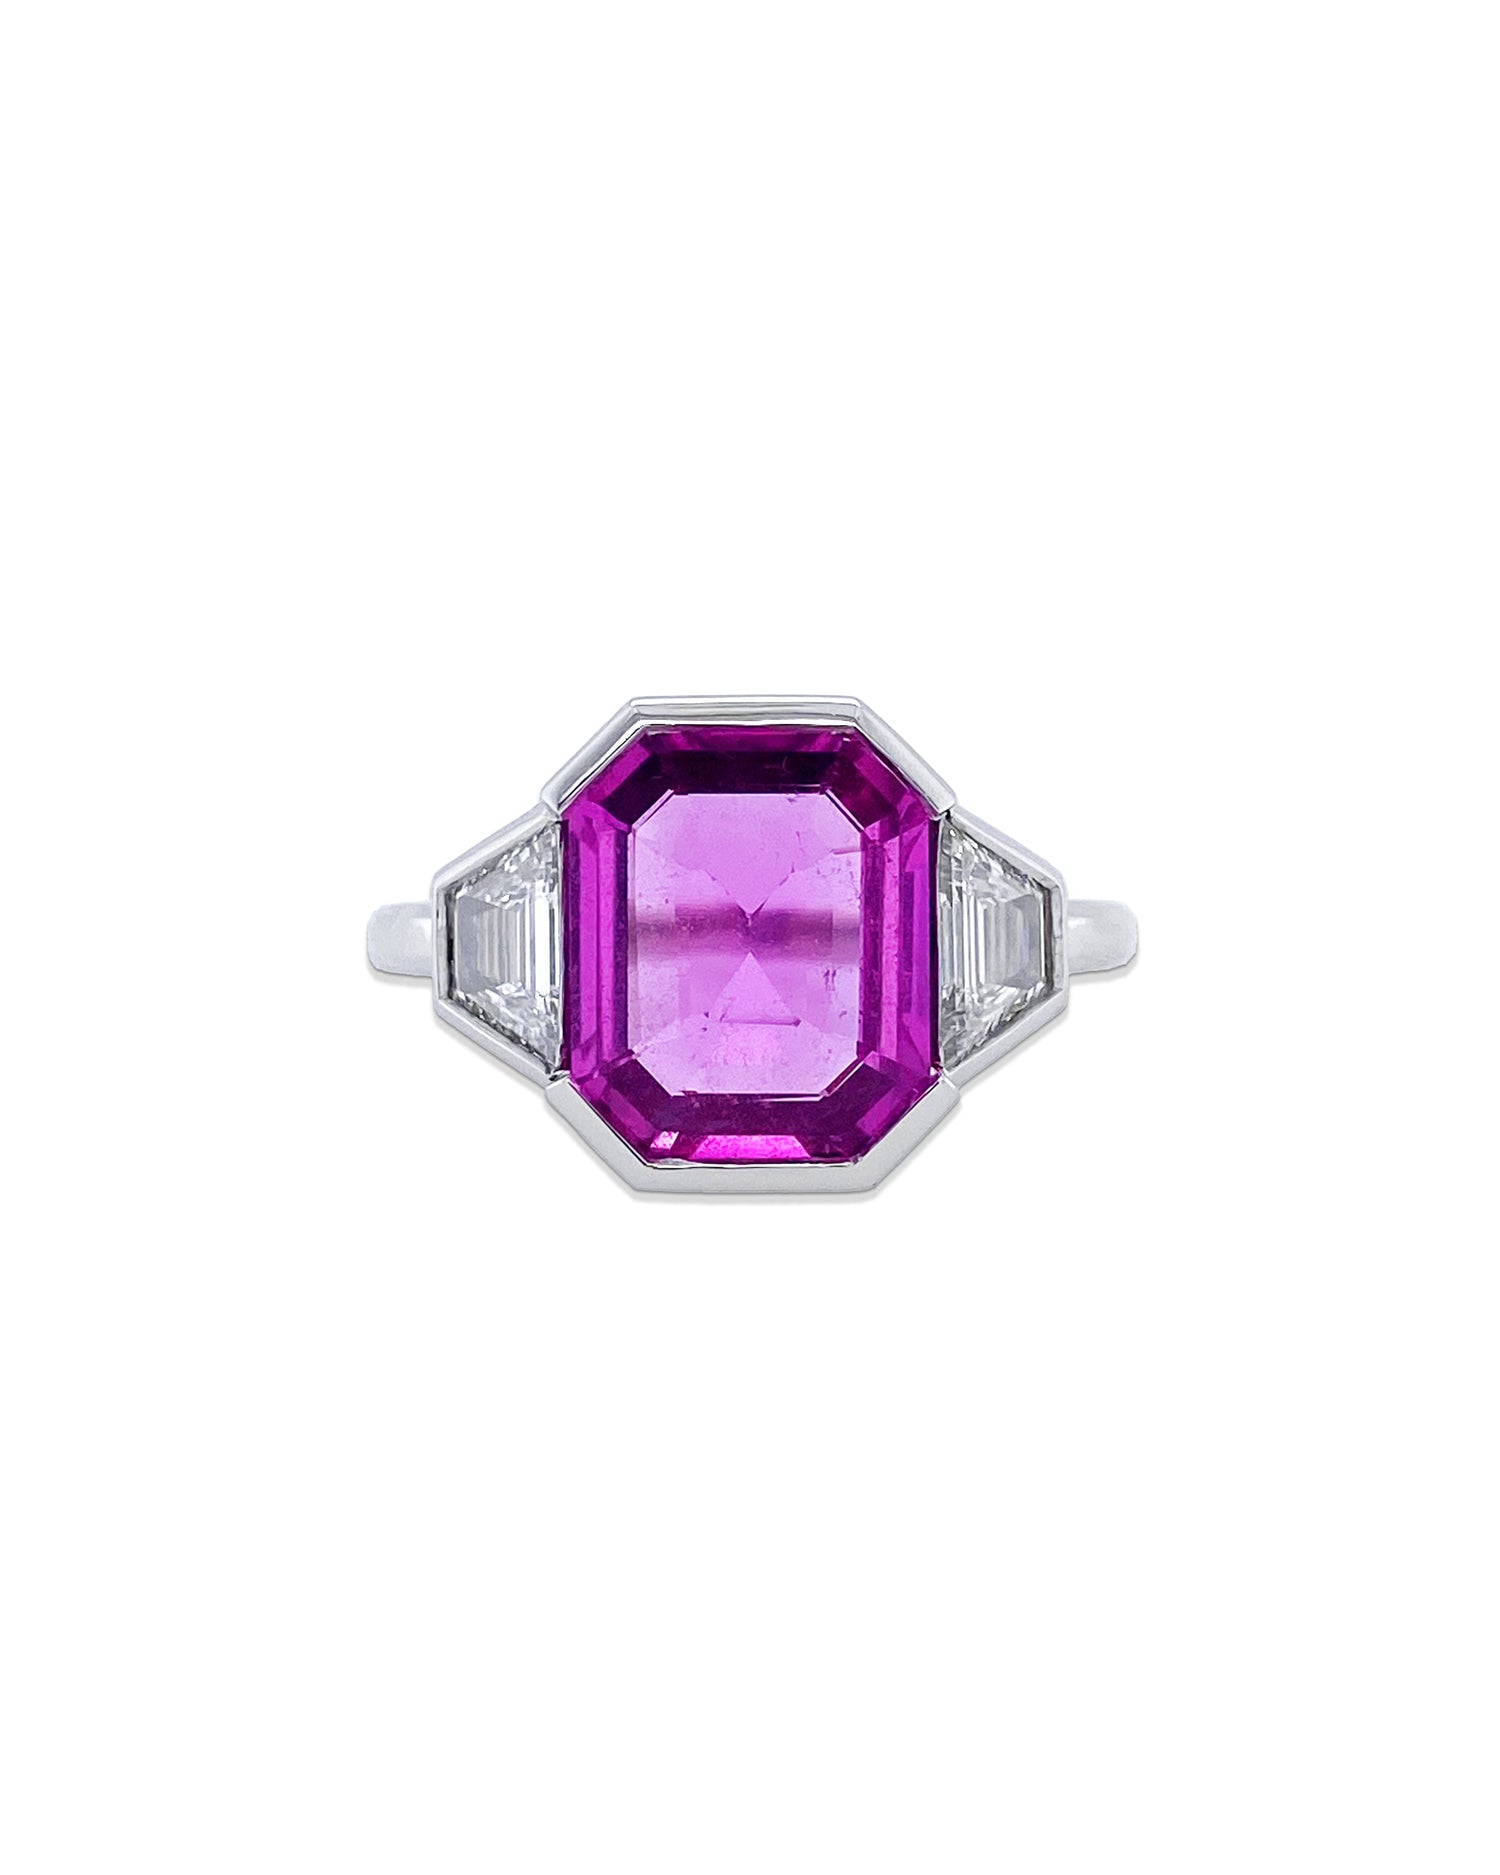 From Bayco's Collection, a platinum ring centered upon a natural unheated emerald-cut Madagascar pink sapphire flanked by colorless trapezoid diamonds, set in a platinum half-bezel surround. The pink sapphire is 3.10 cttws and the diamonds are .61 cttws. 